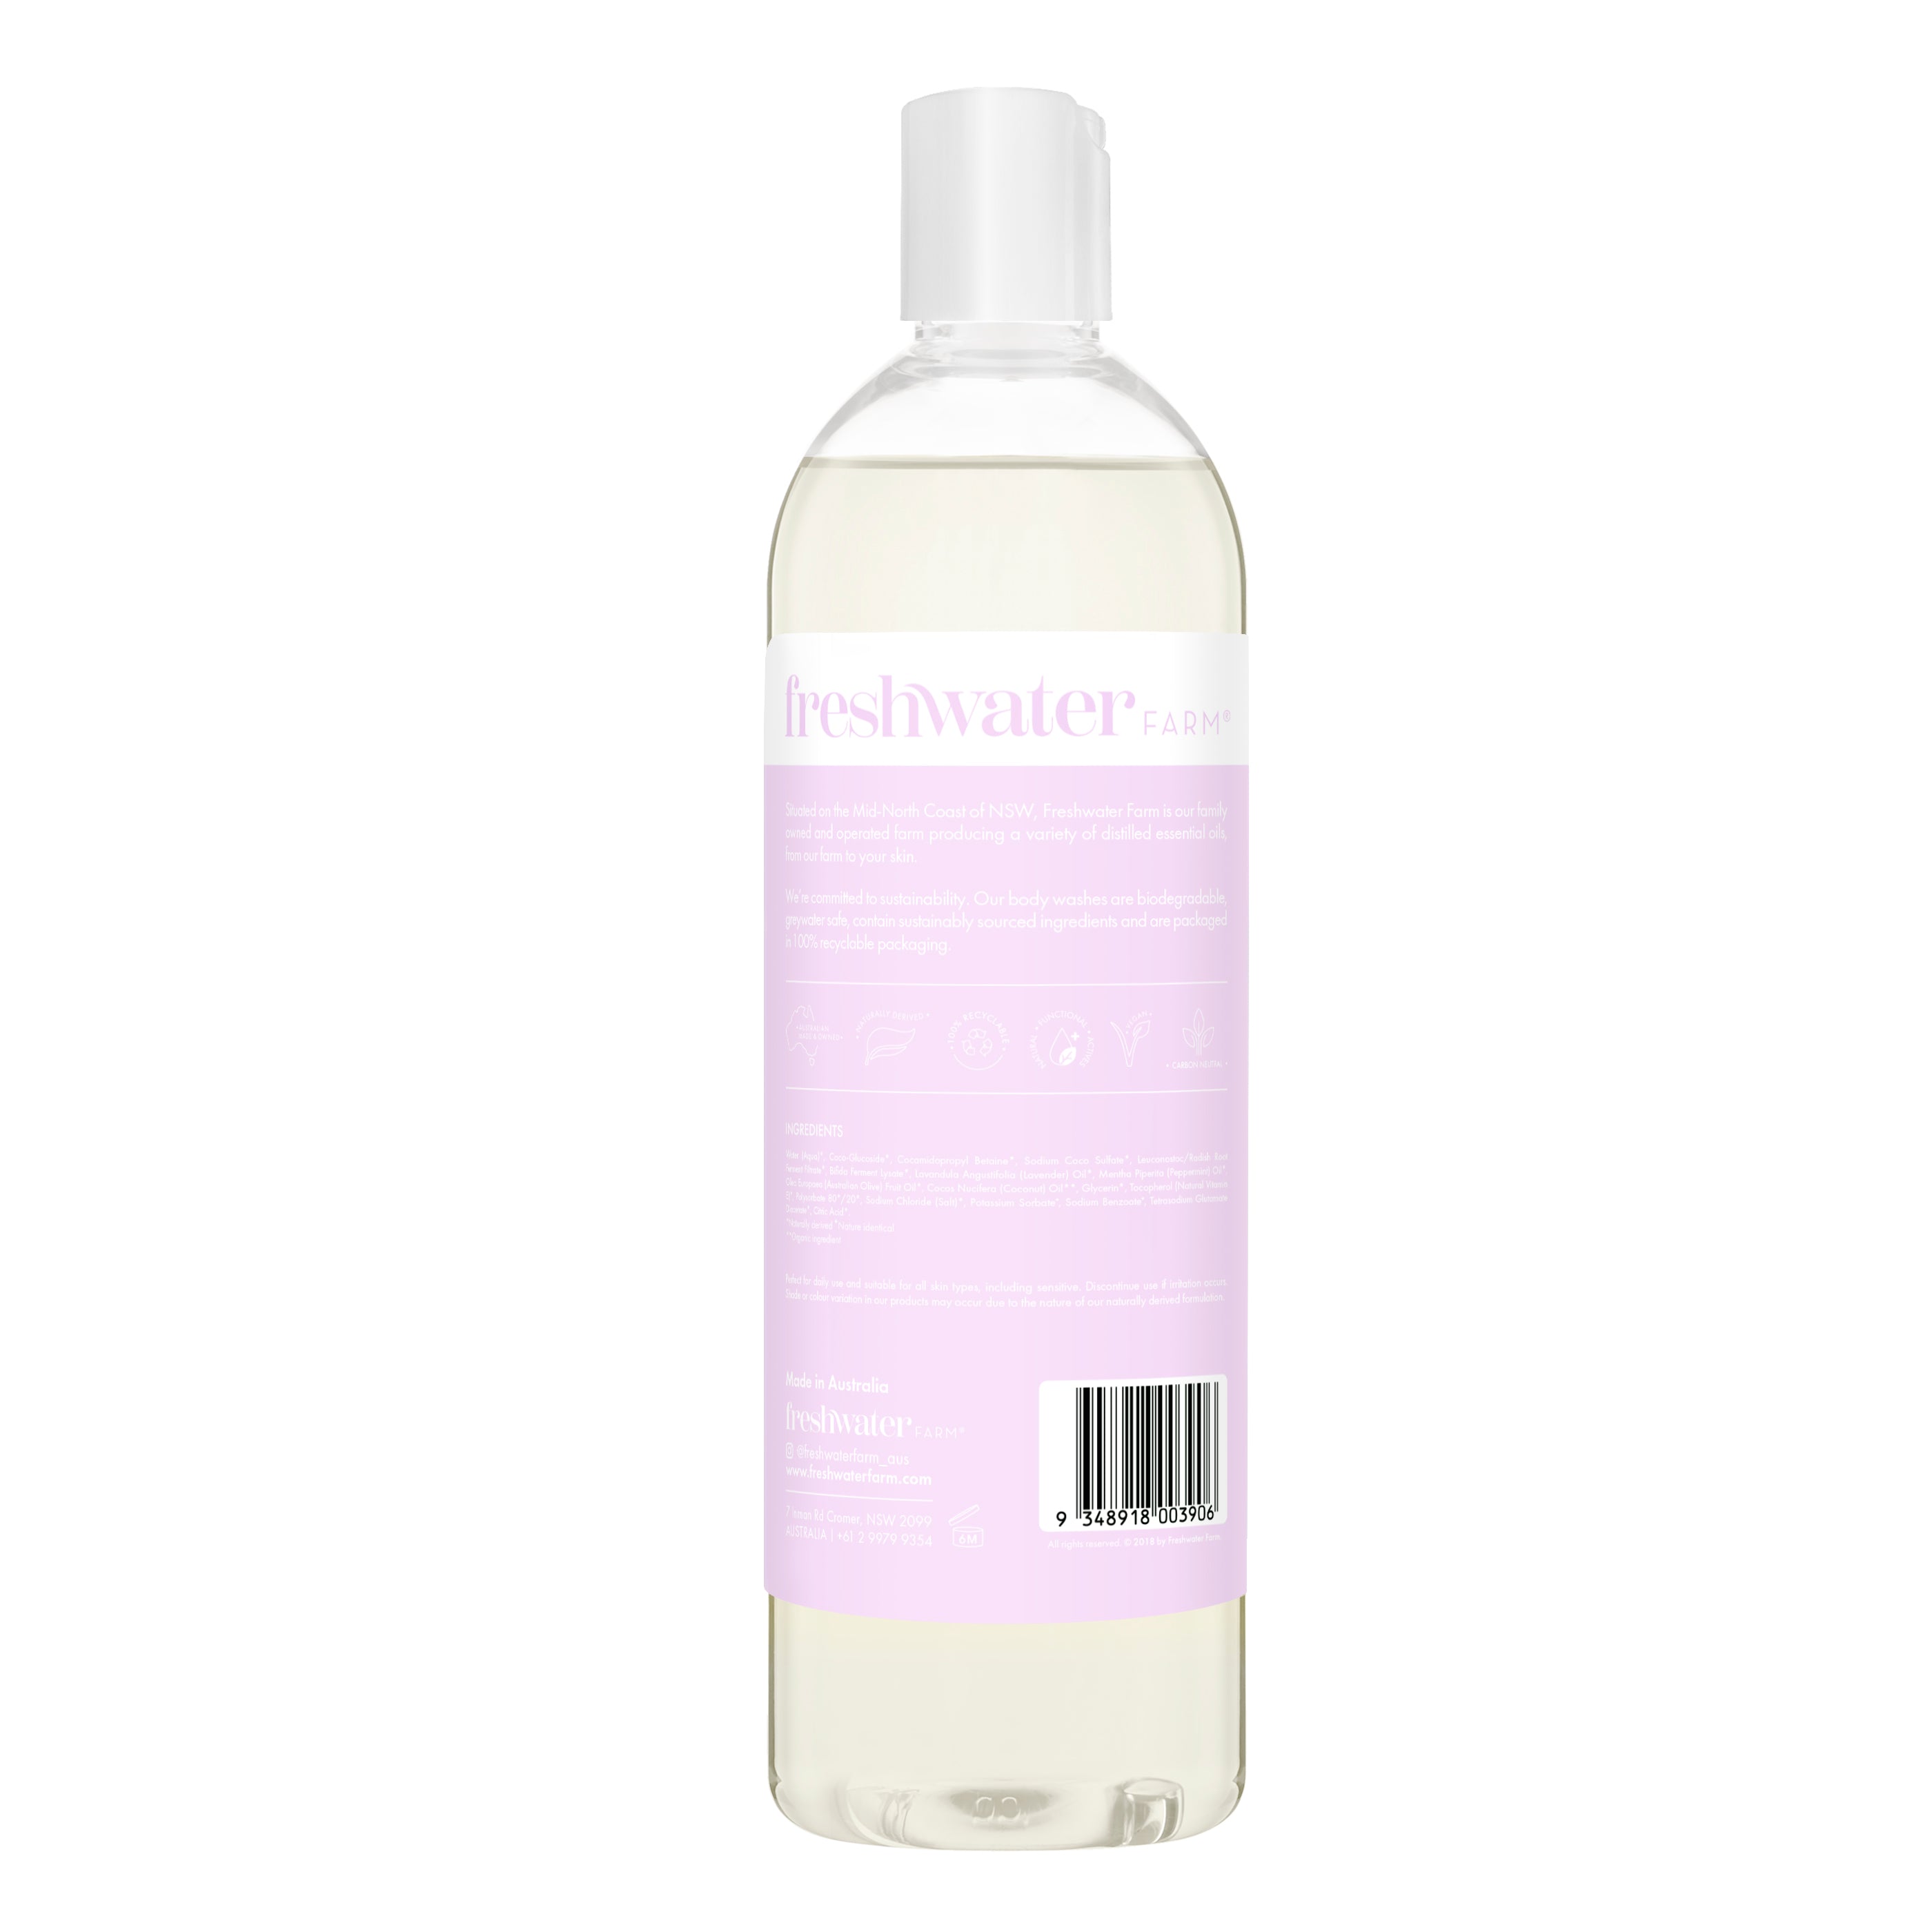 NATURAL ACTIVES BODY WASH | Strengthening Probiotic 500ml